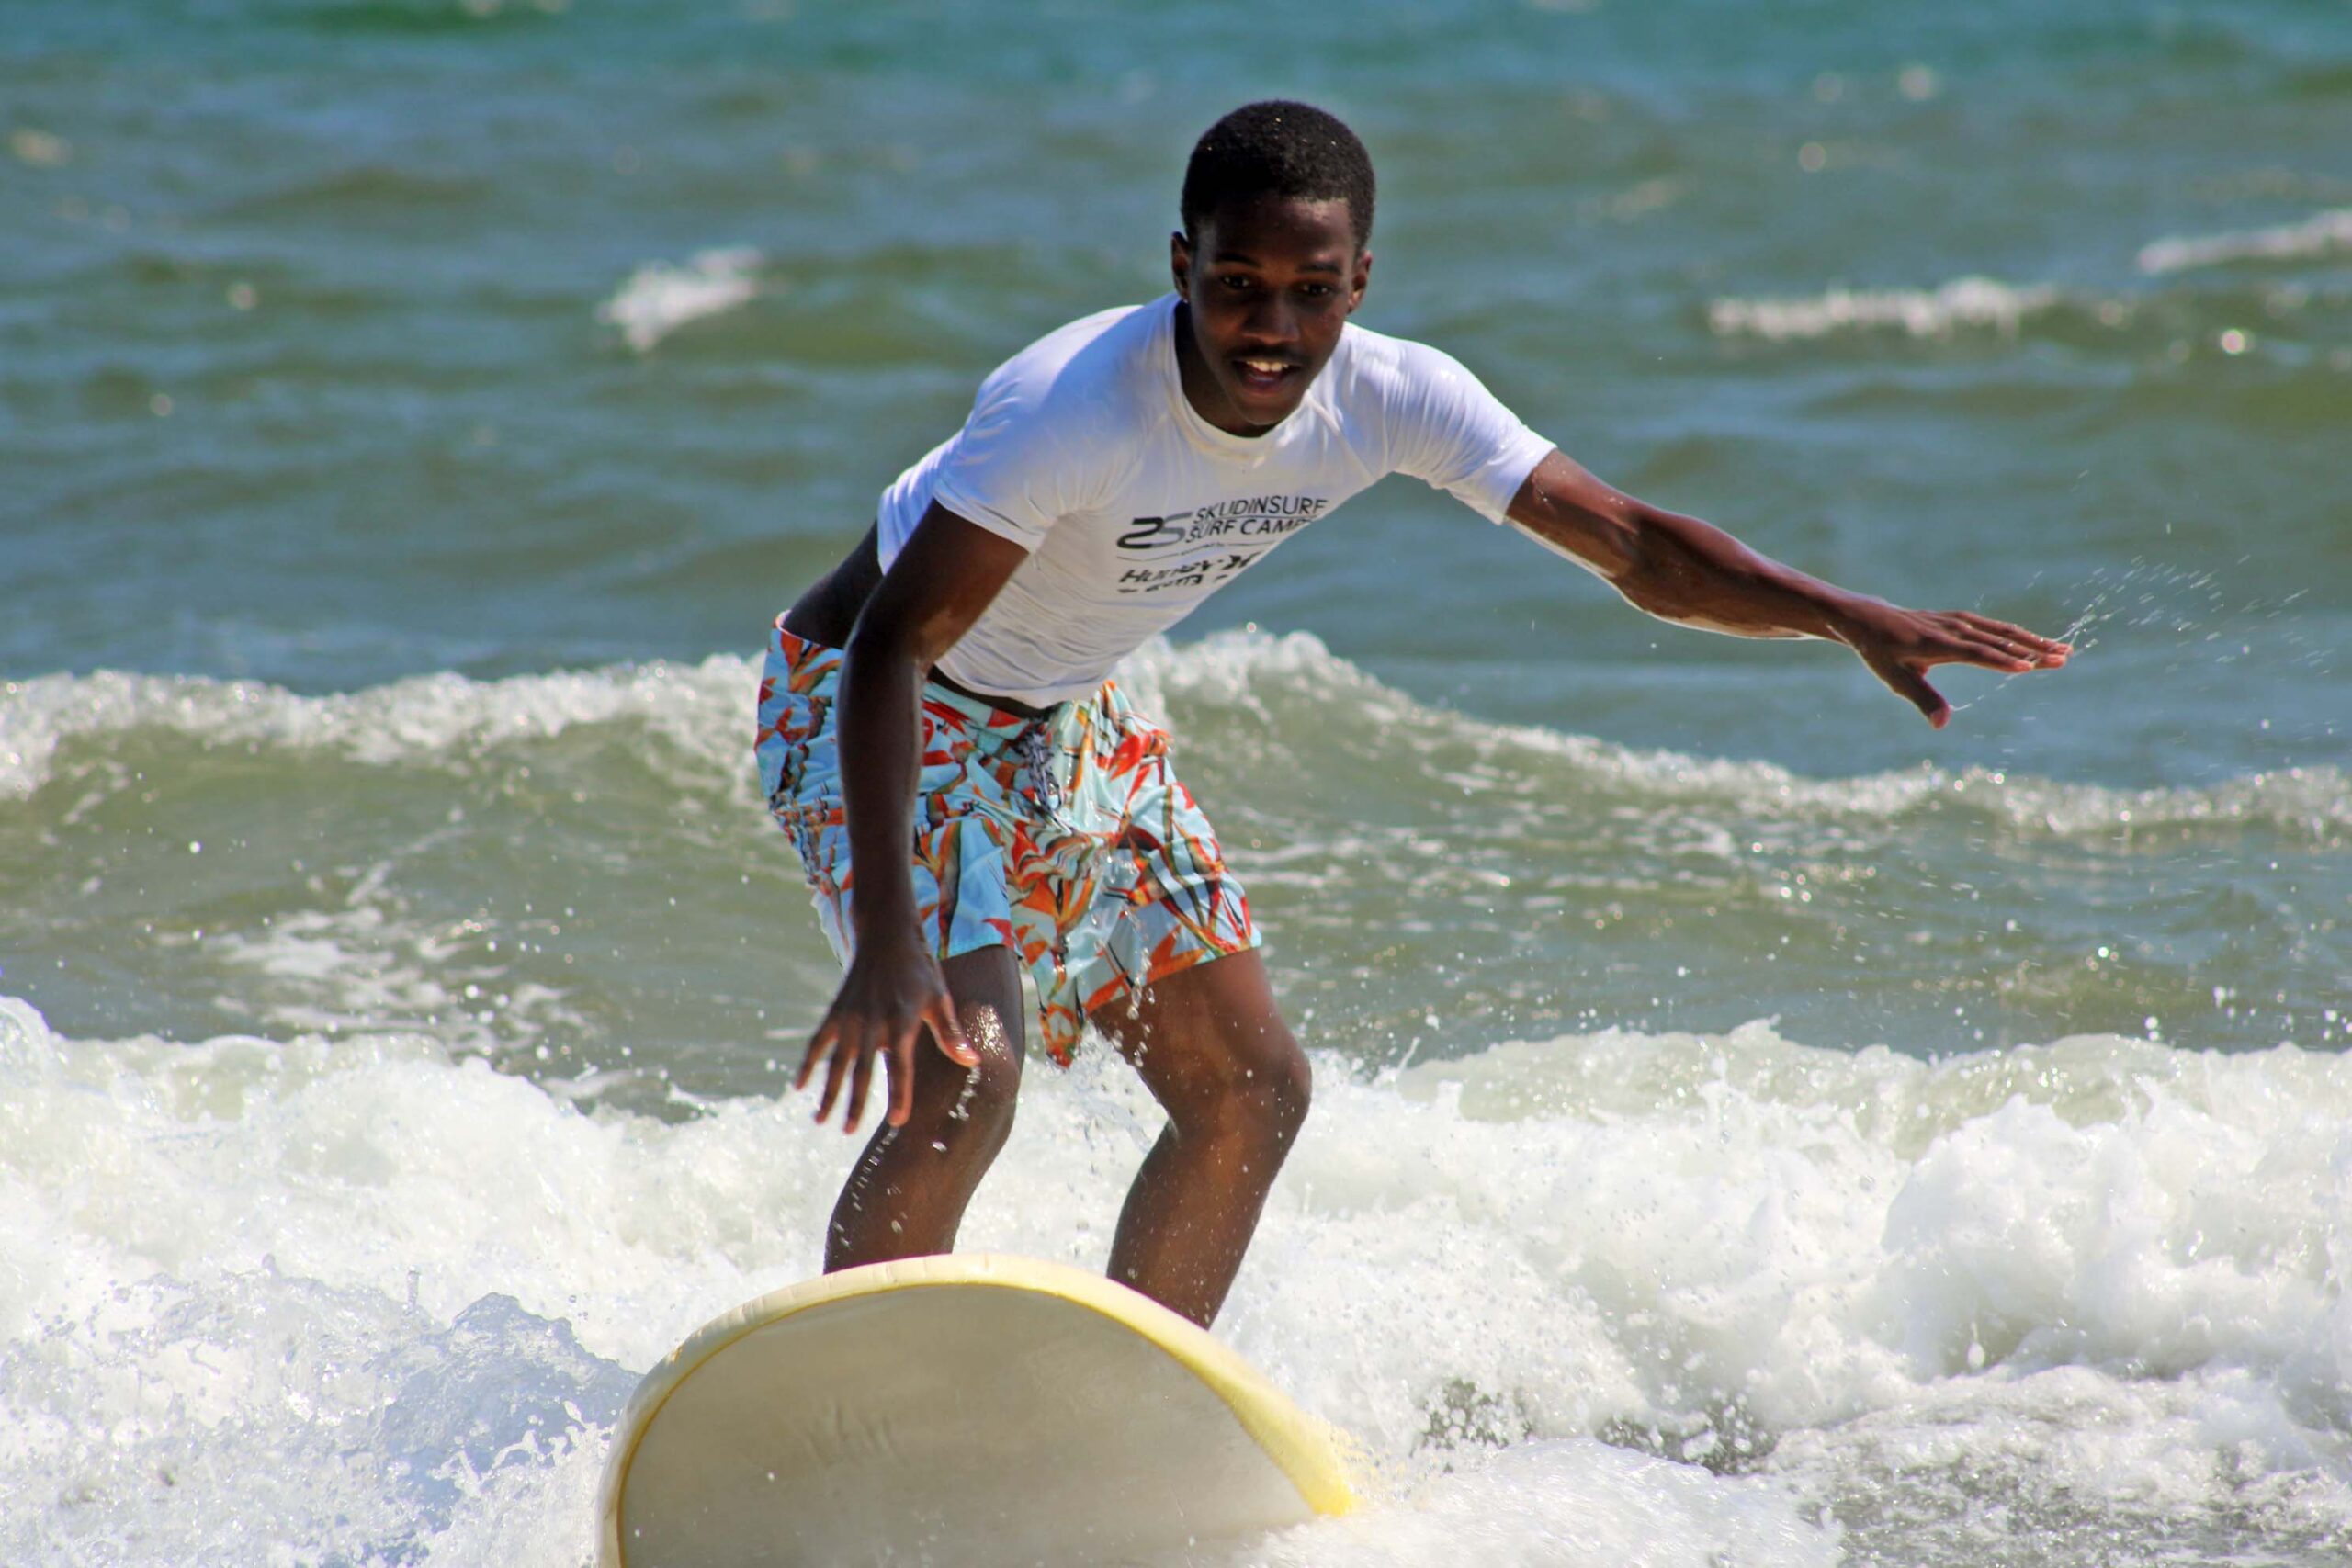 A Chill youth riding a wave.